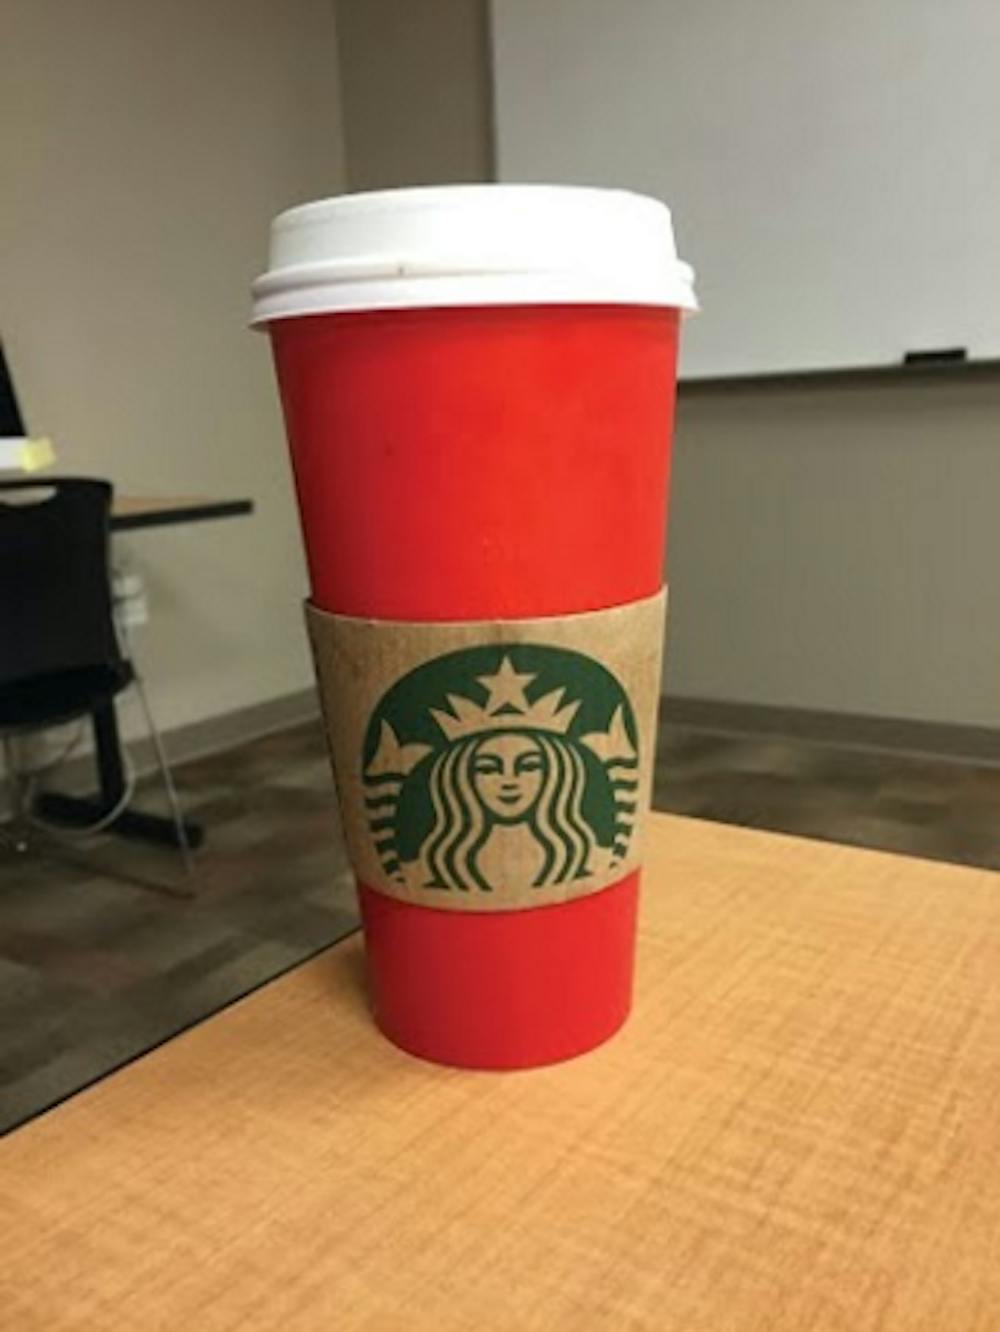 A Starbucks simple red cup design has stirred controversy this holiday season as some see it as an affront on religious traditions.